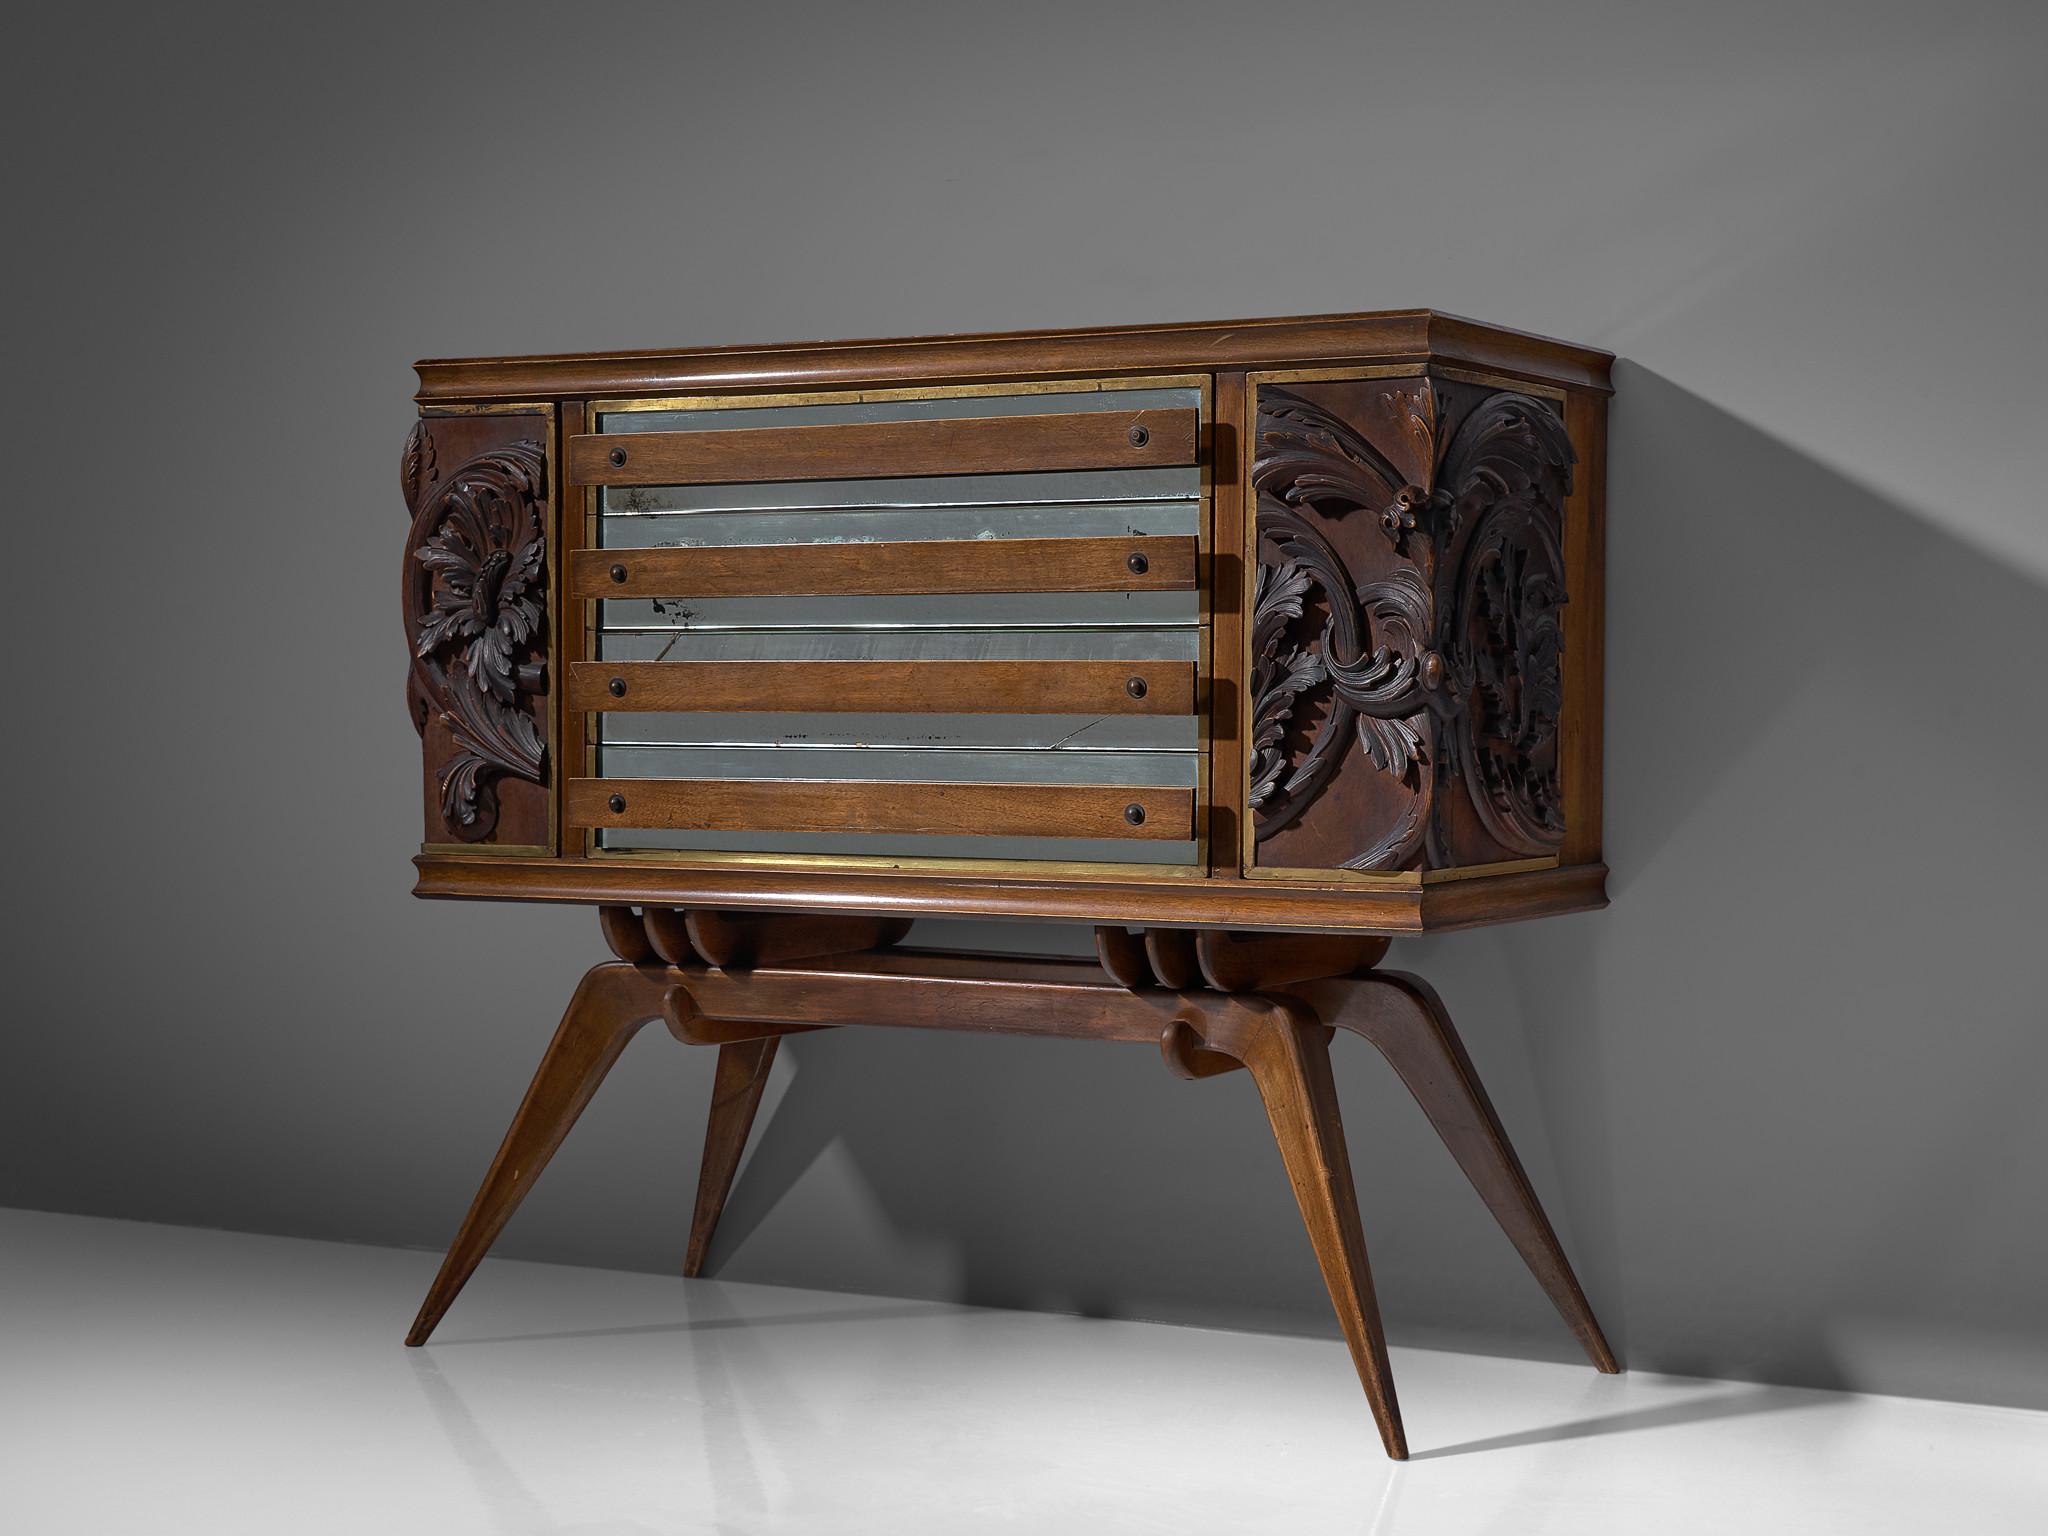 Italian elegant sideboard in oak originates from the 1940s. The two outer door panels show a very detailled relief of floral motifs, which give this sideboard an expressive touch. Behind the carvings storage facility can be found on each side.